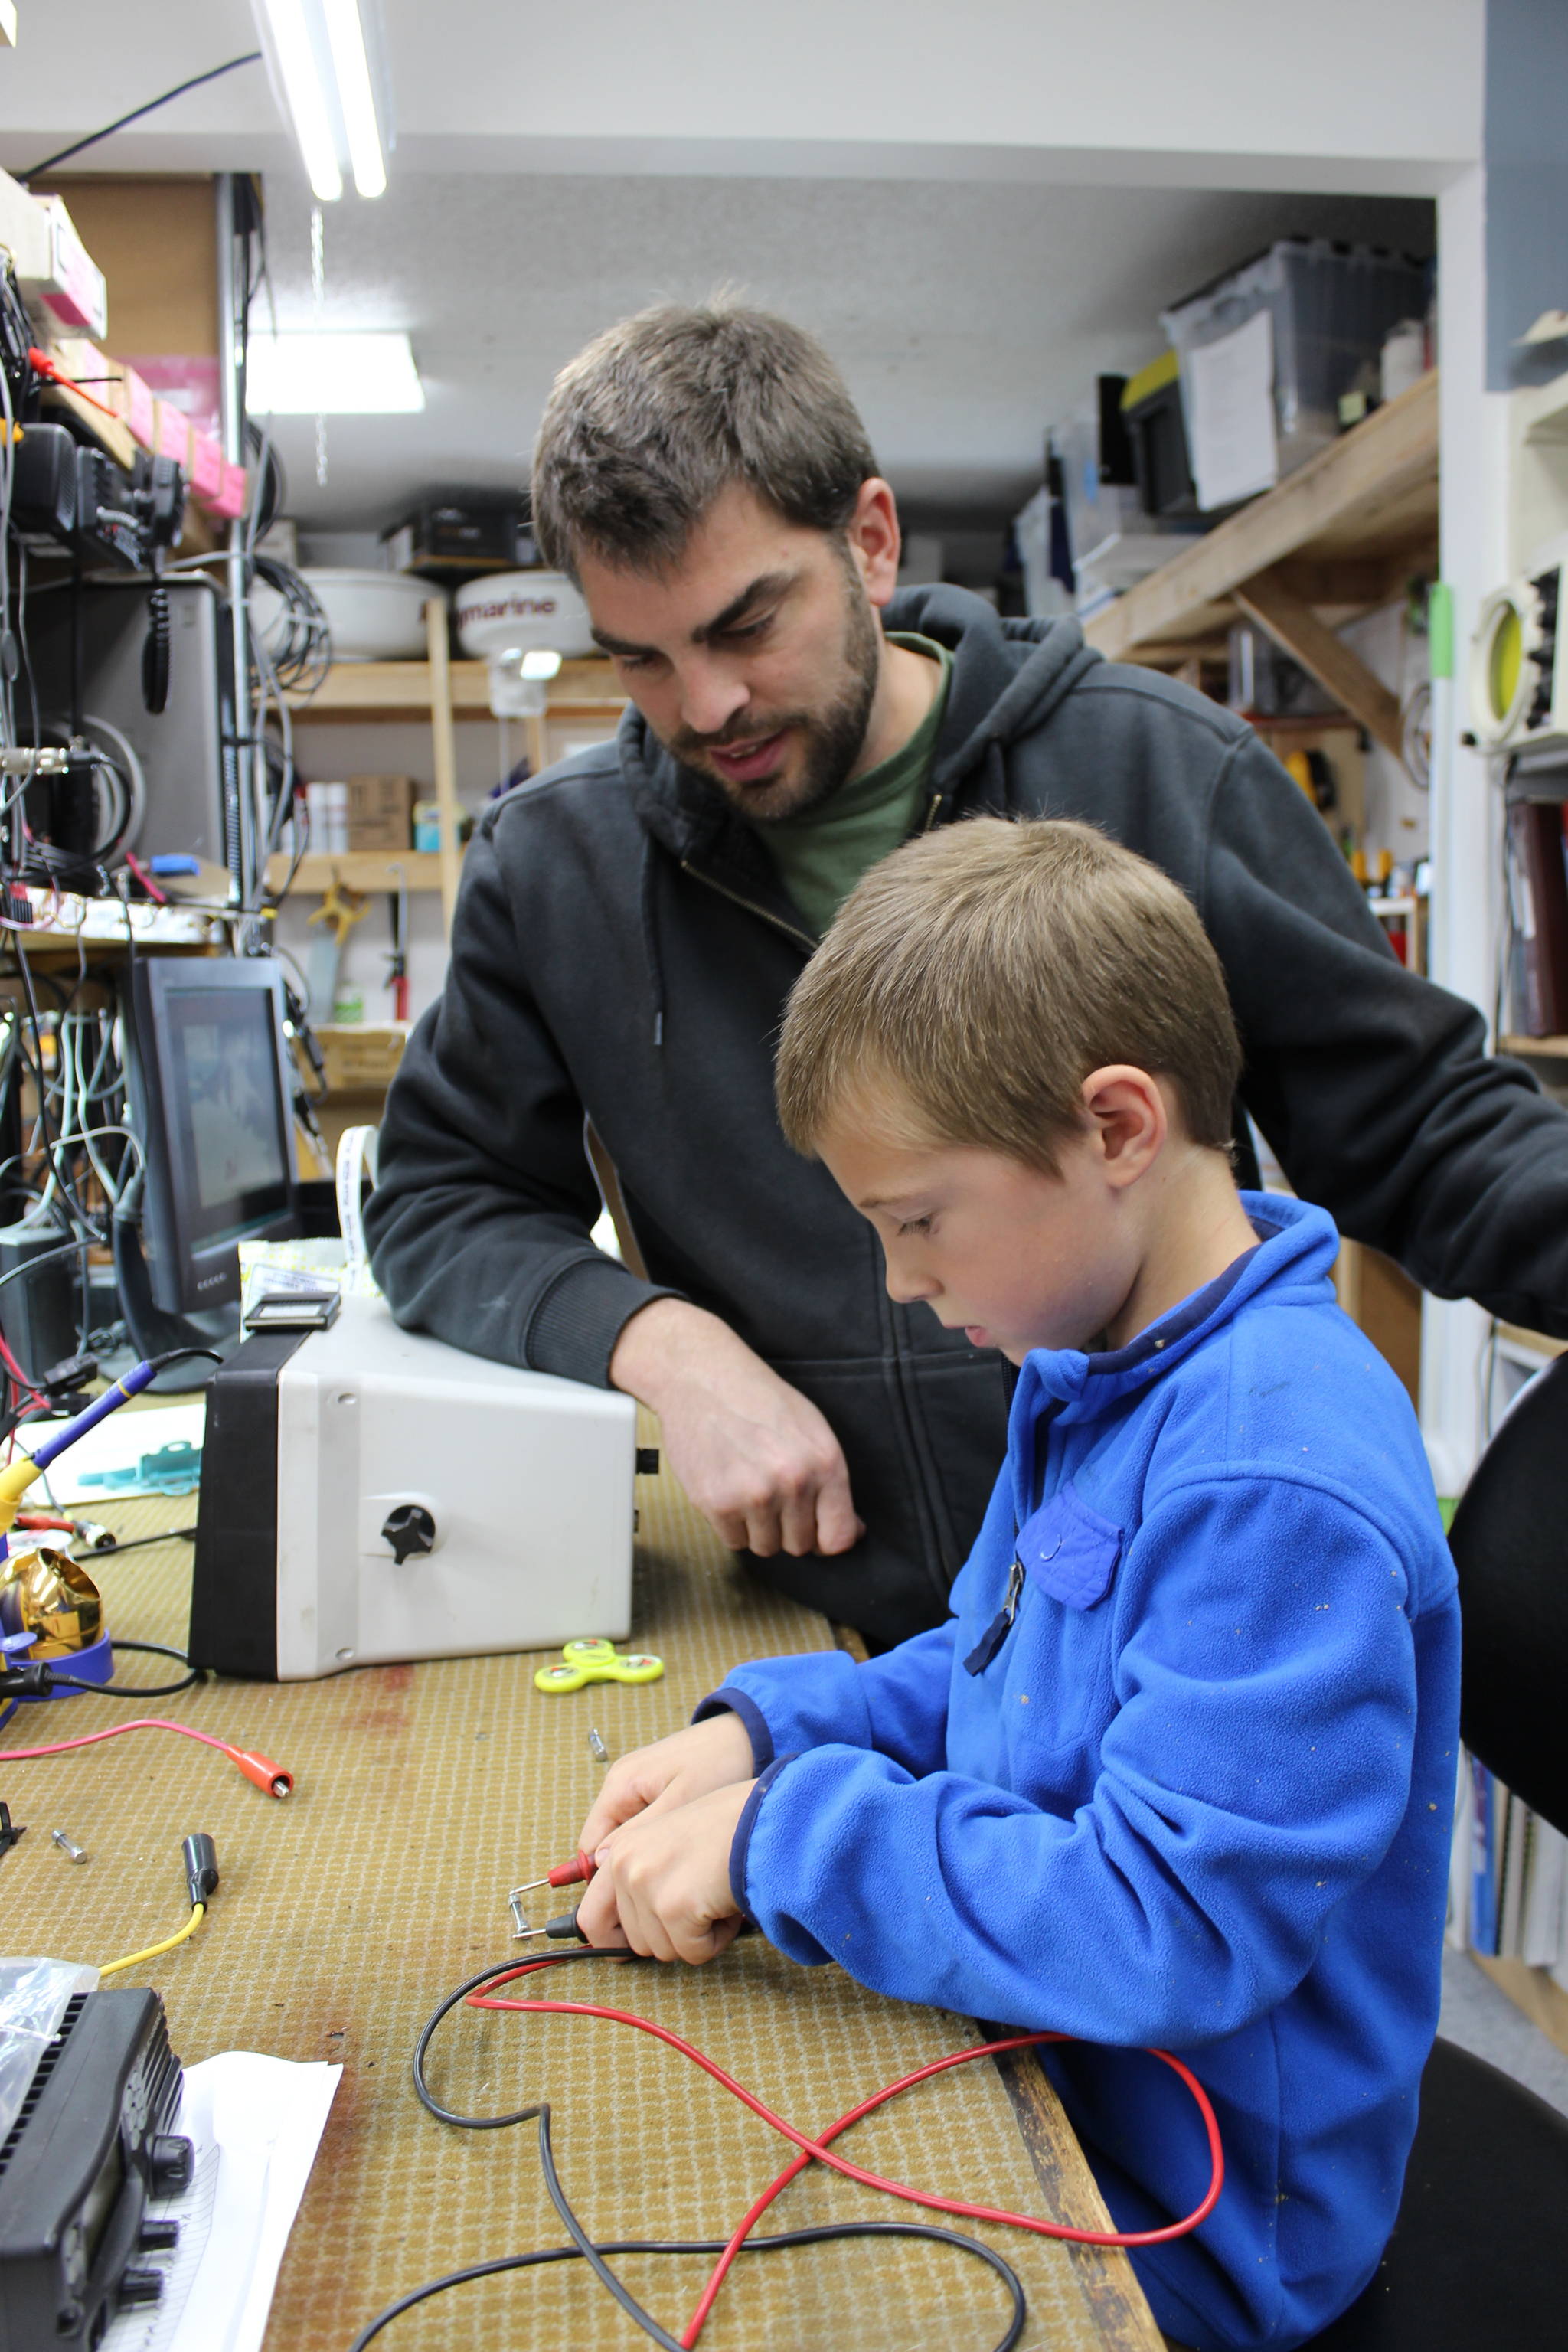 In a good example of building the next generation of marine trades-related professionals, Mark Zeiset, owner of South Central Radar, teaches his son Finn, 6, how to test fuses. )Photo by McKibben Jackinsky for the Homer News)